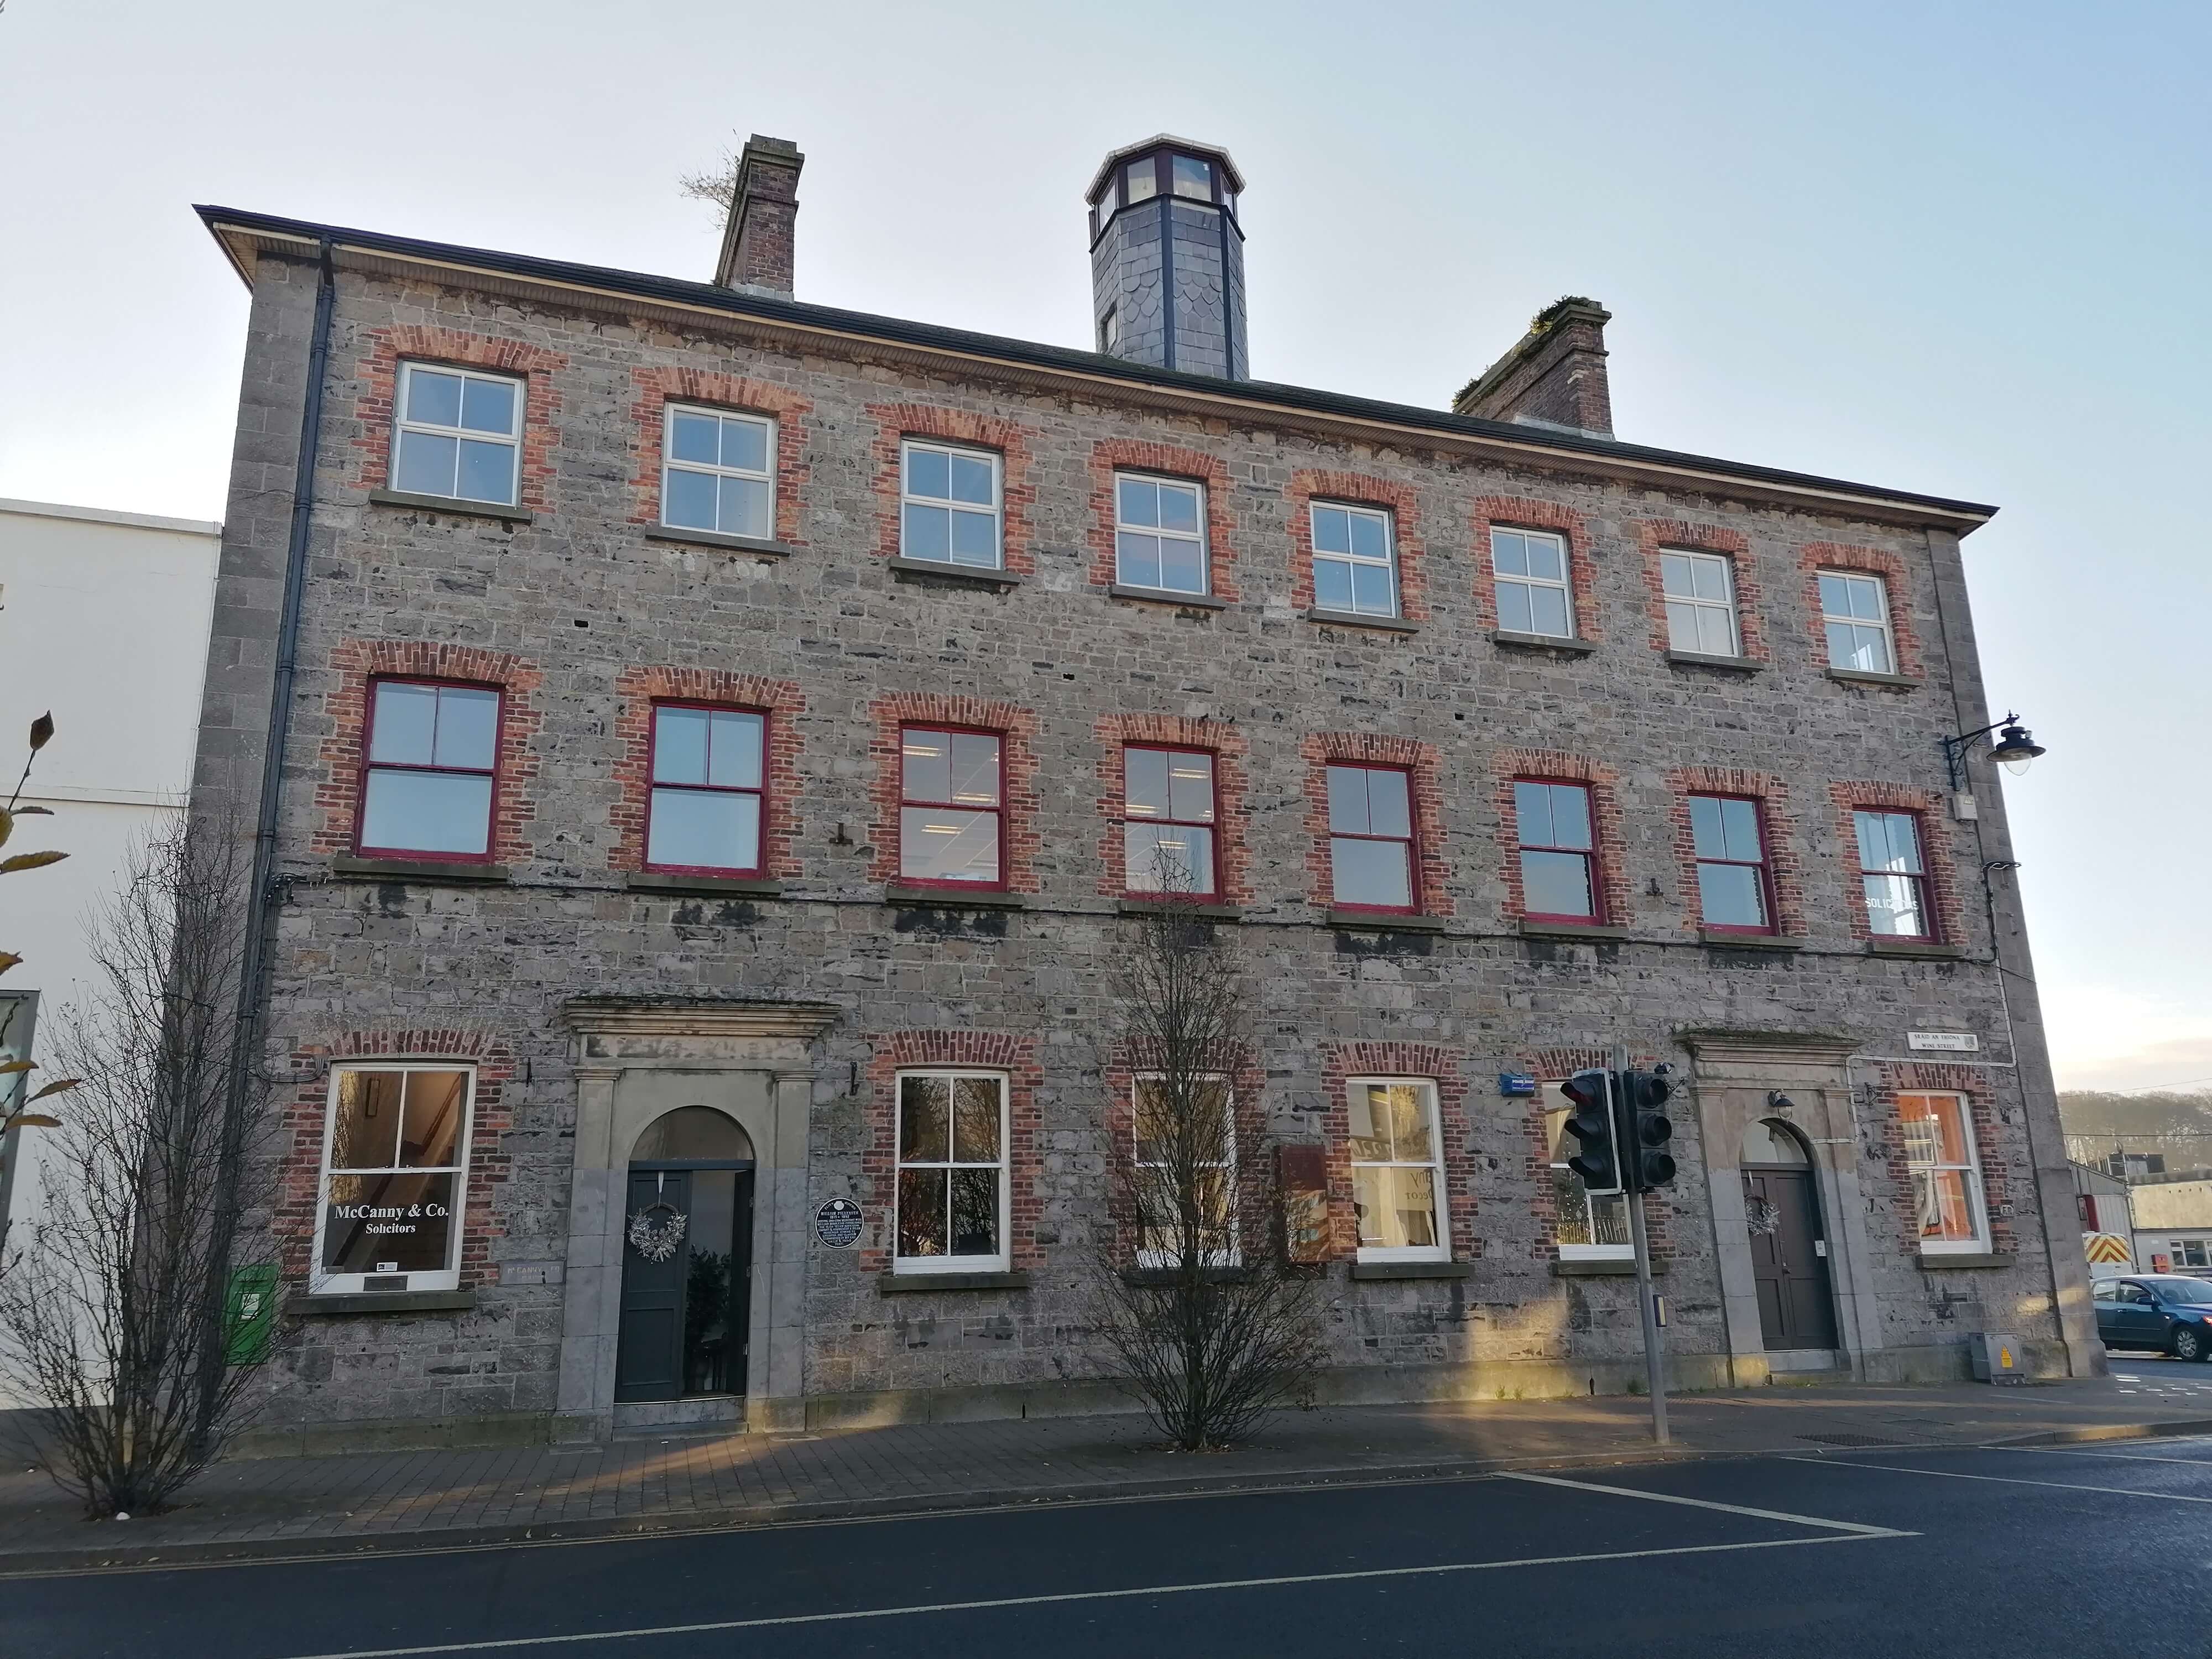 €132,500 for five Sligo projects under the Historic Structures Fund